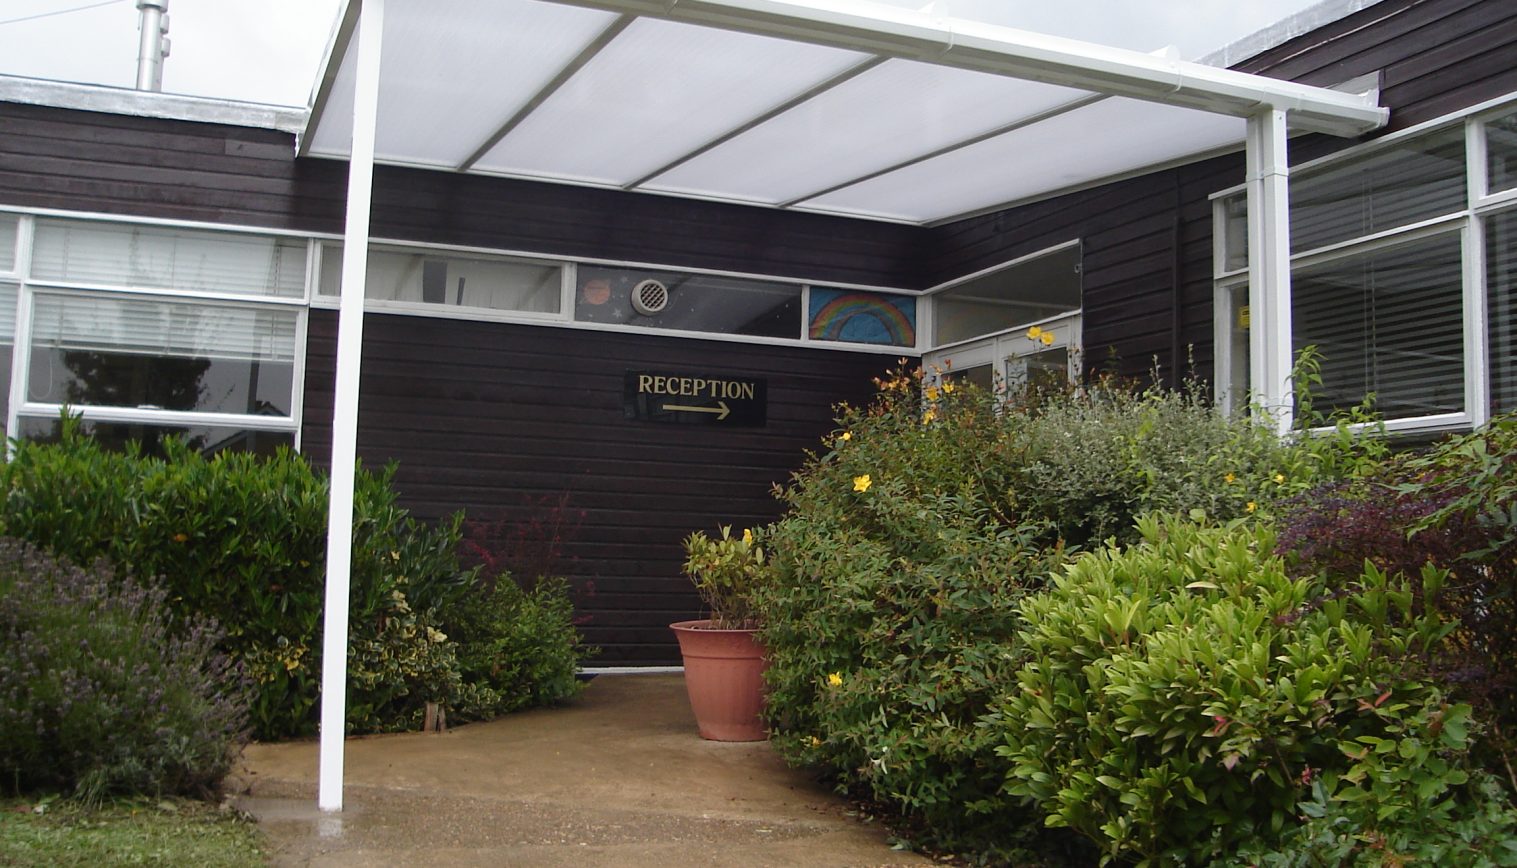 Wood End School – Wall Mounted Entrance Canopy